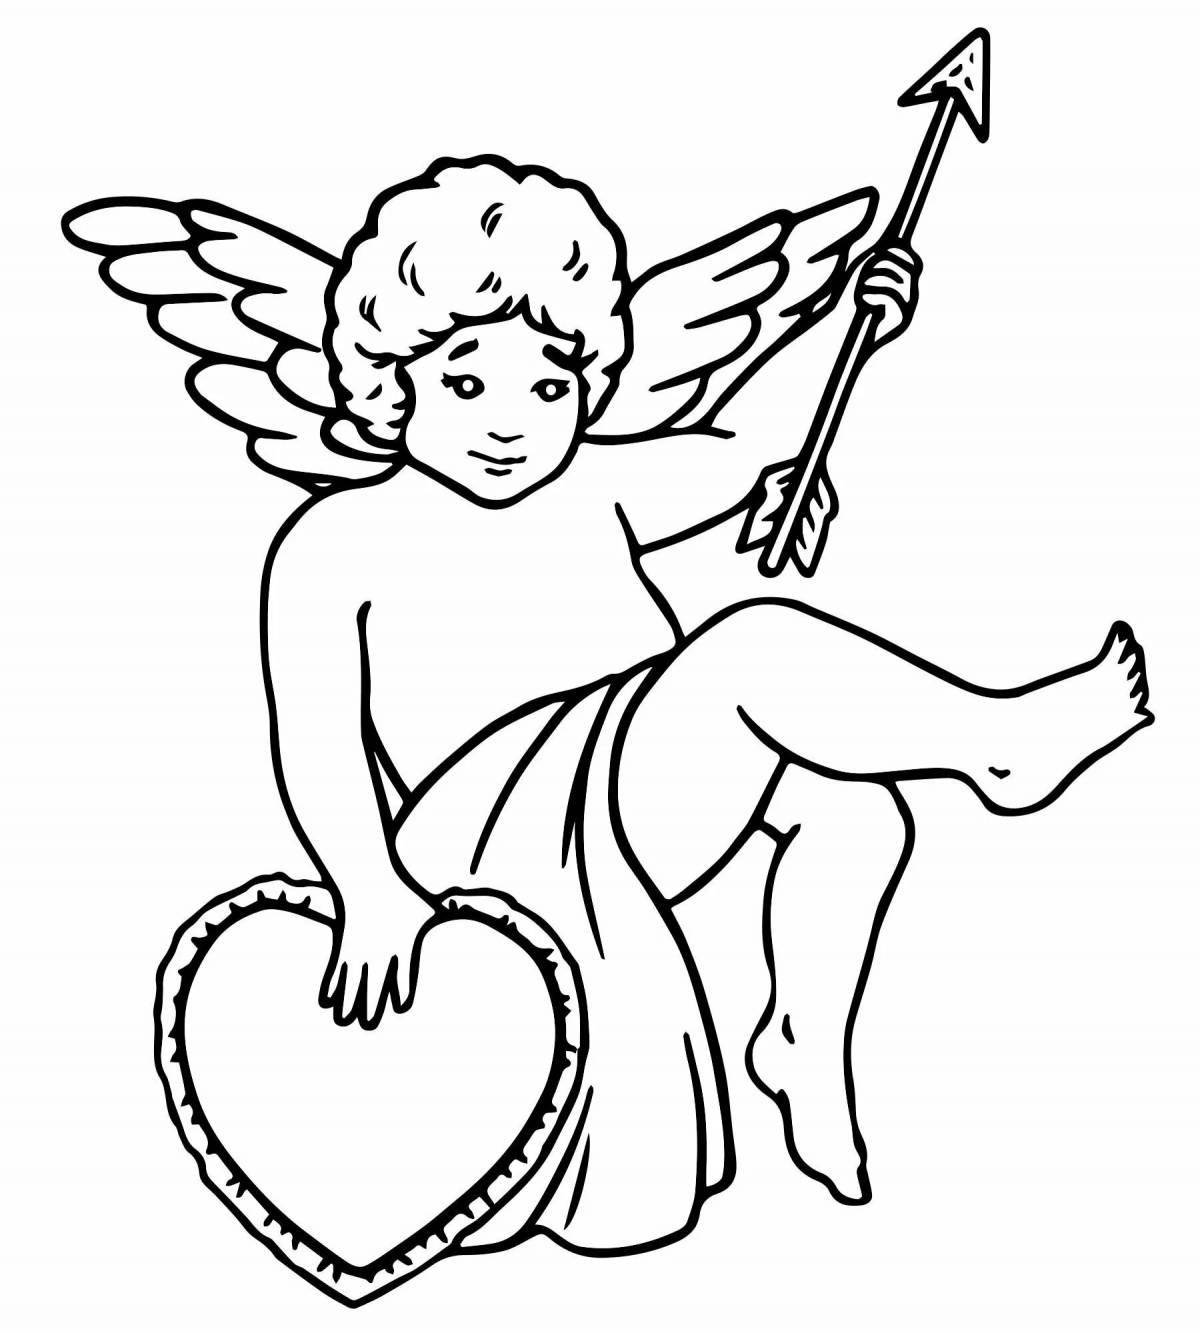 Coloring book shining cupid with heart